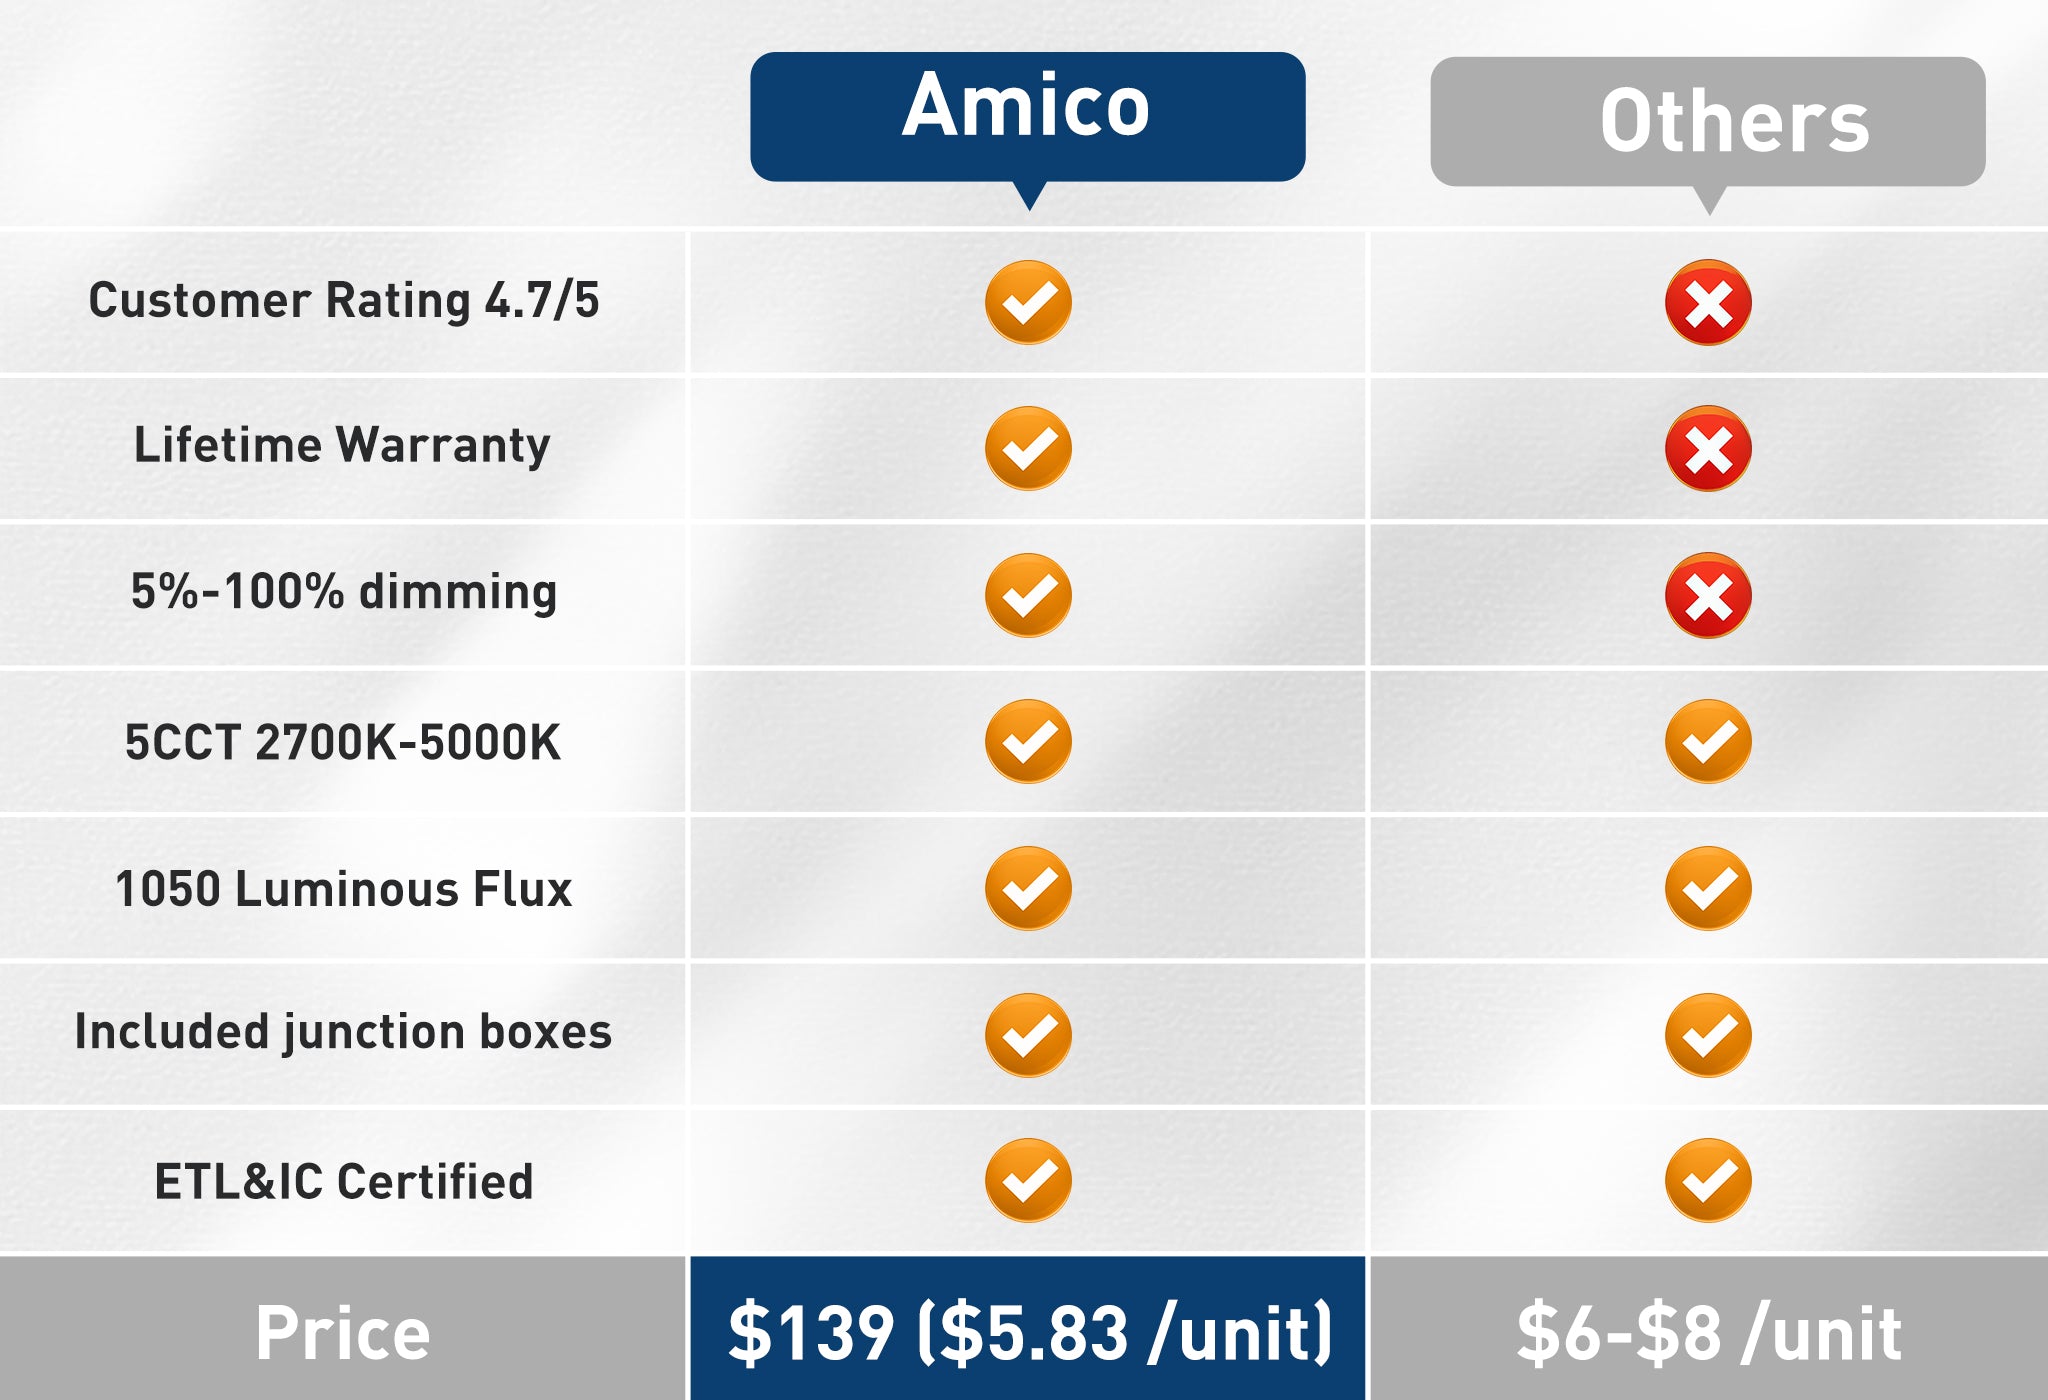 The comparison between Amico Lighting And Others